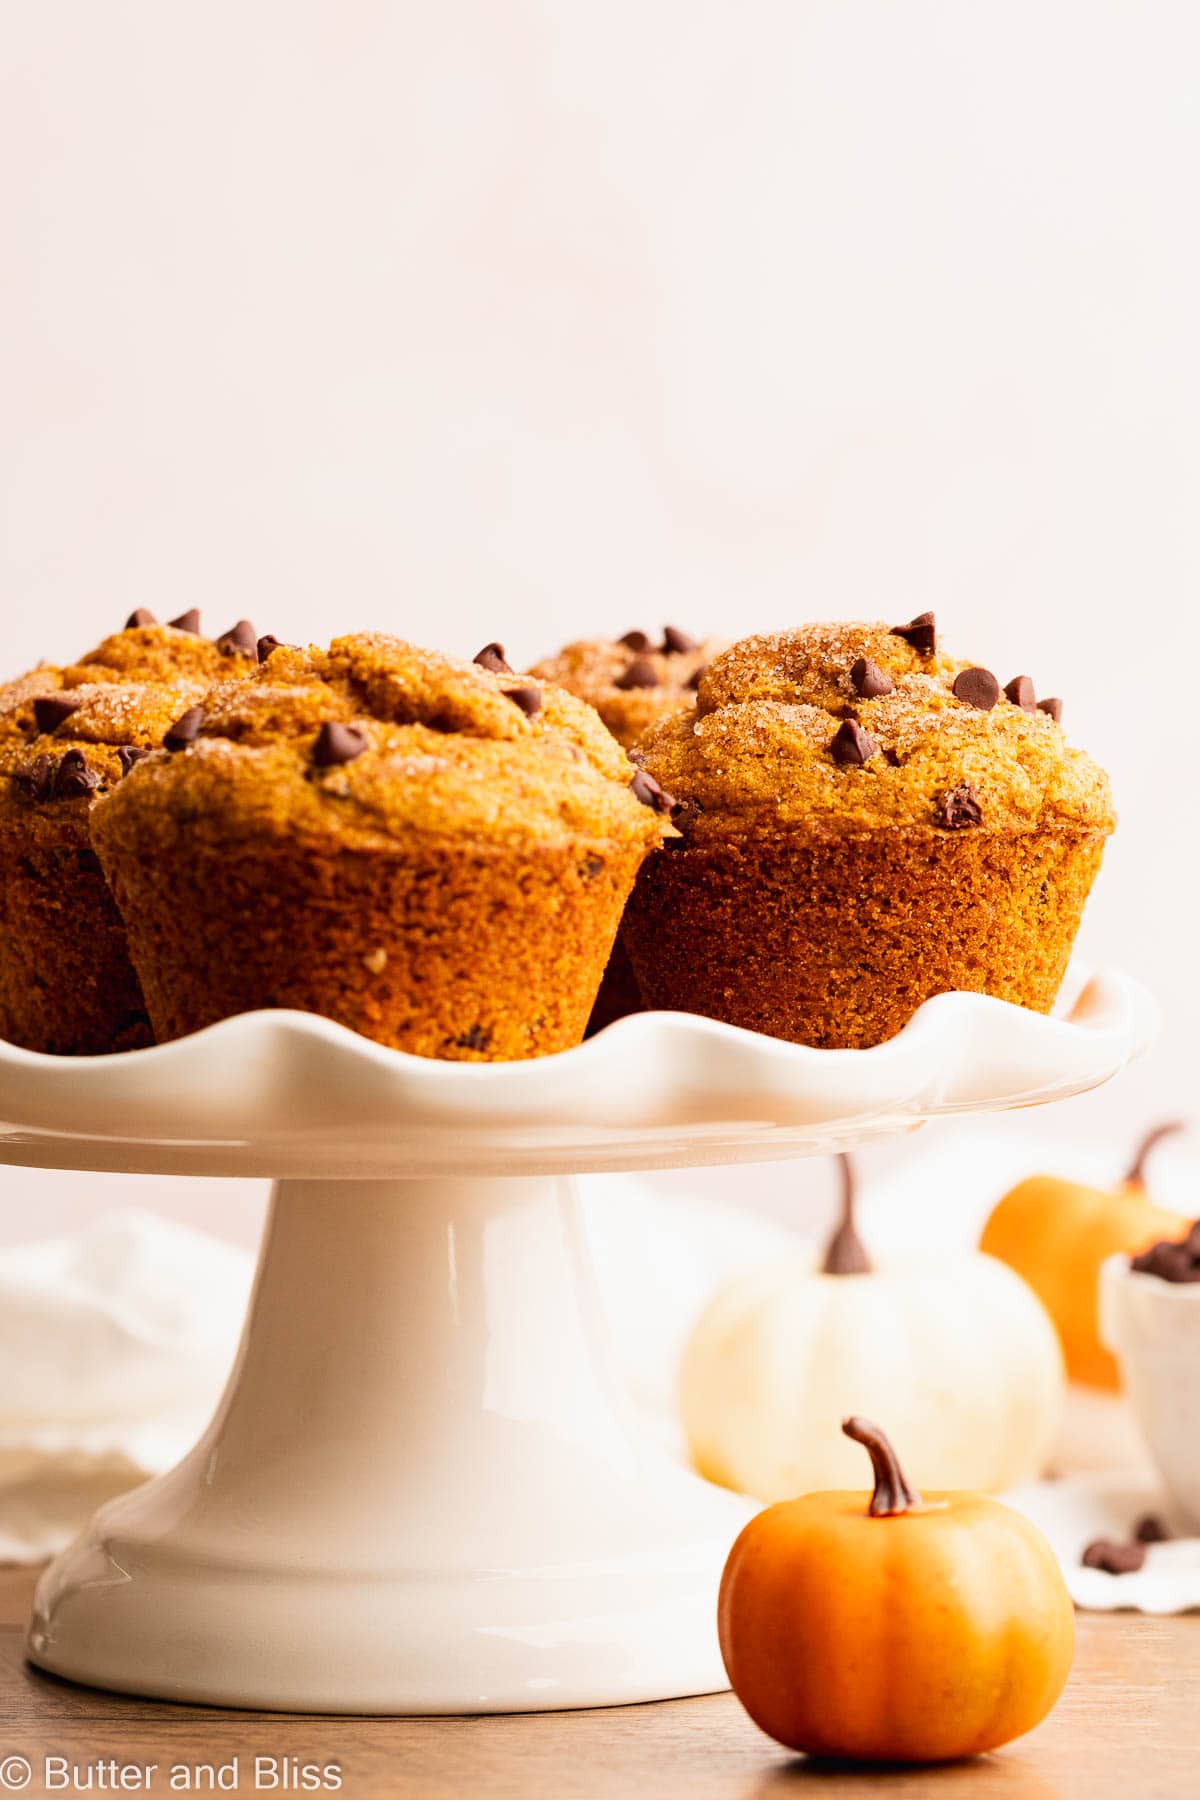 Gluten free pumpkin muffins with chocolate chips arranged on a pretty white cake stand.